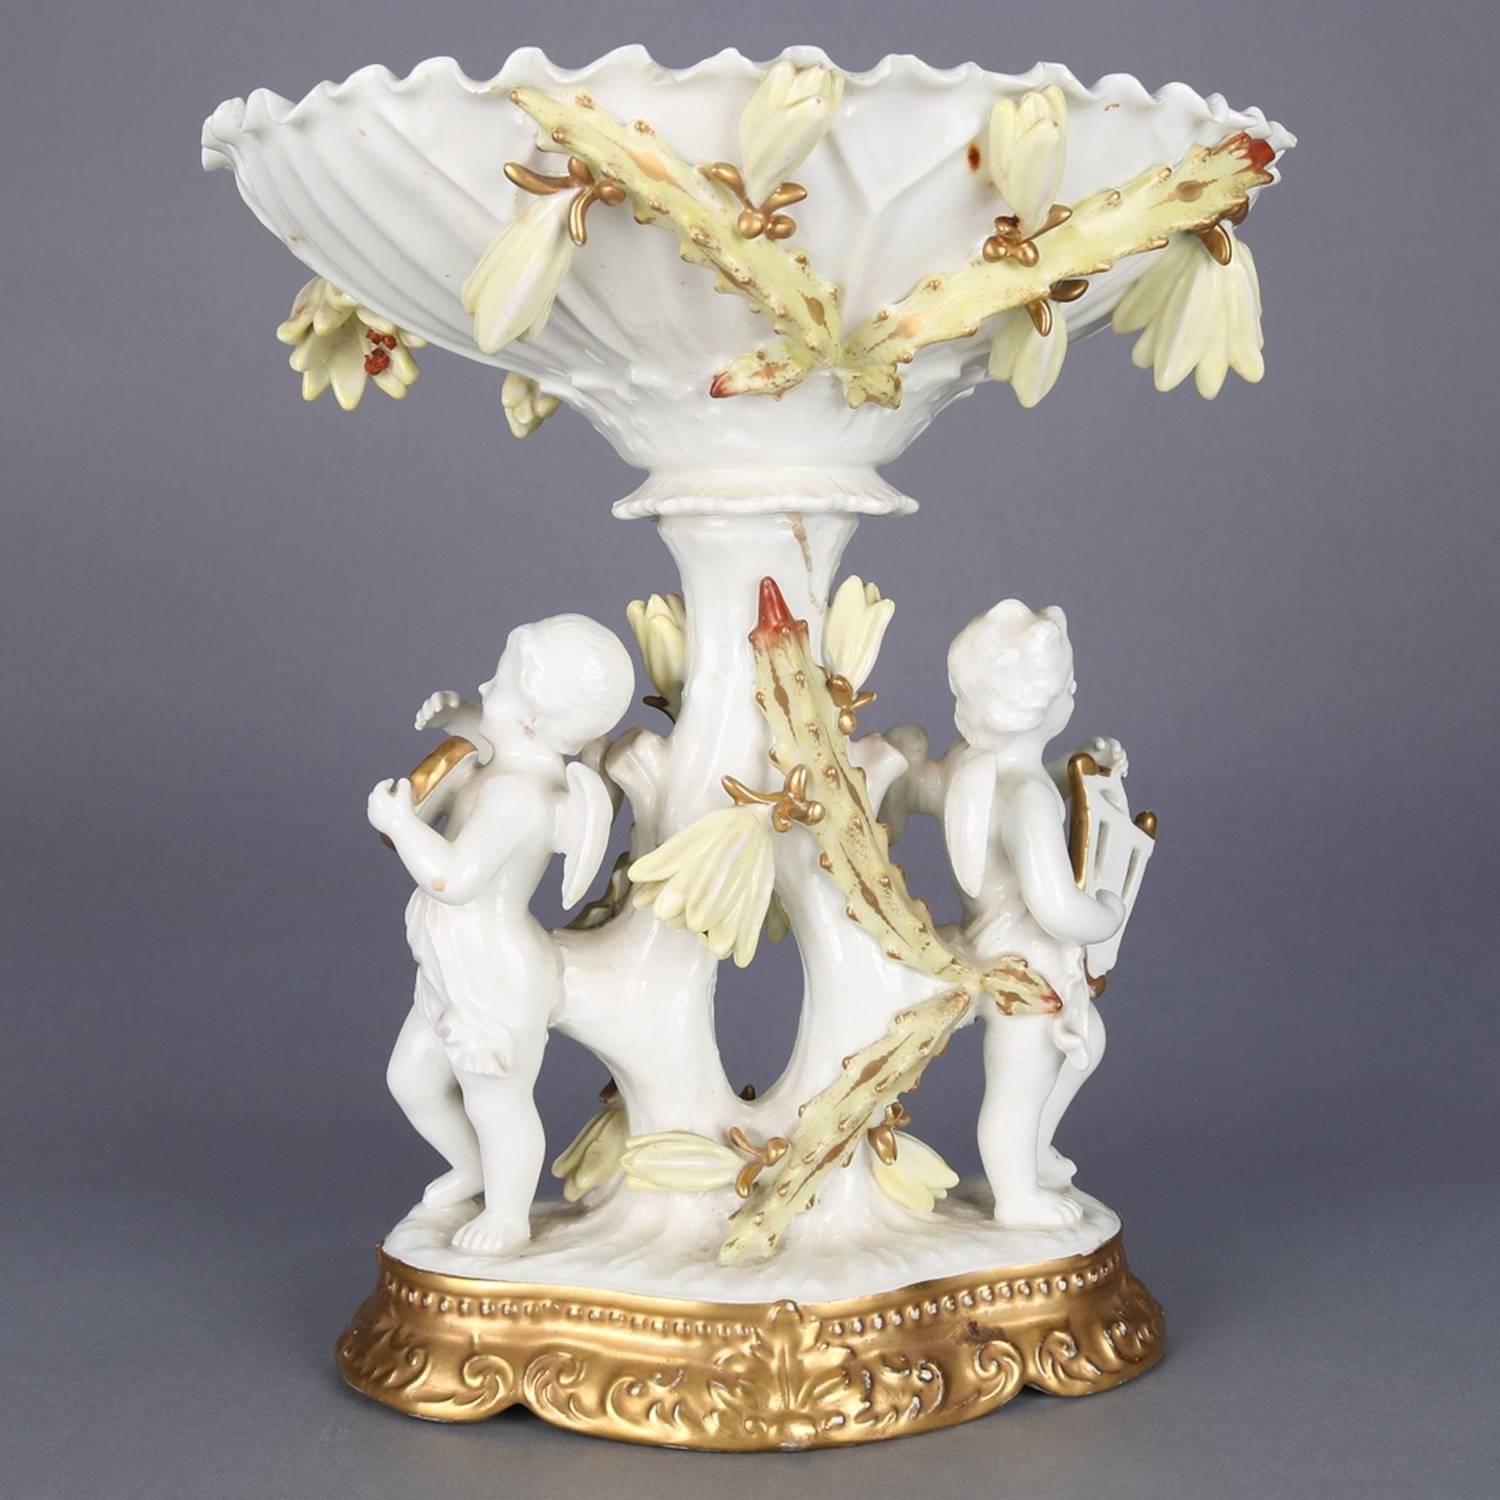 19th Century Antique French Limoges Classical Meissen School Figural Gilt Cherub Compote